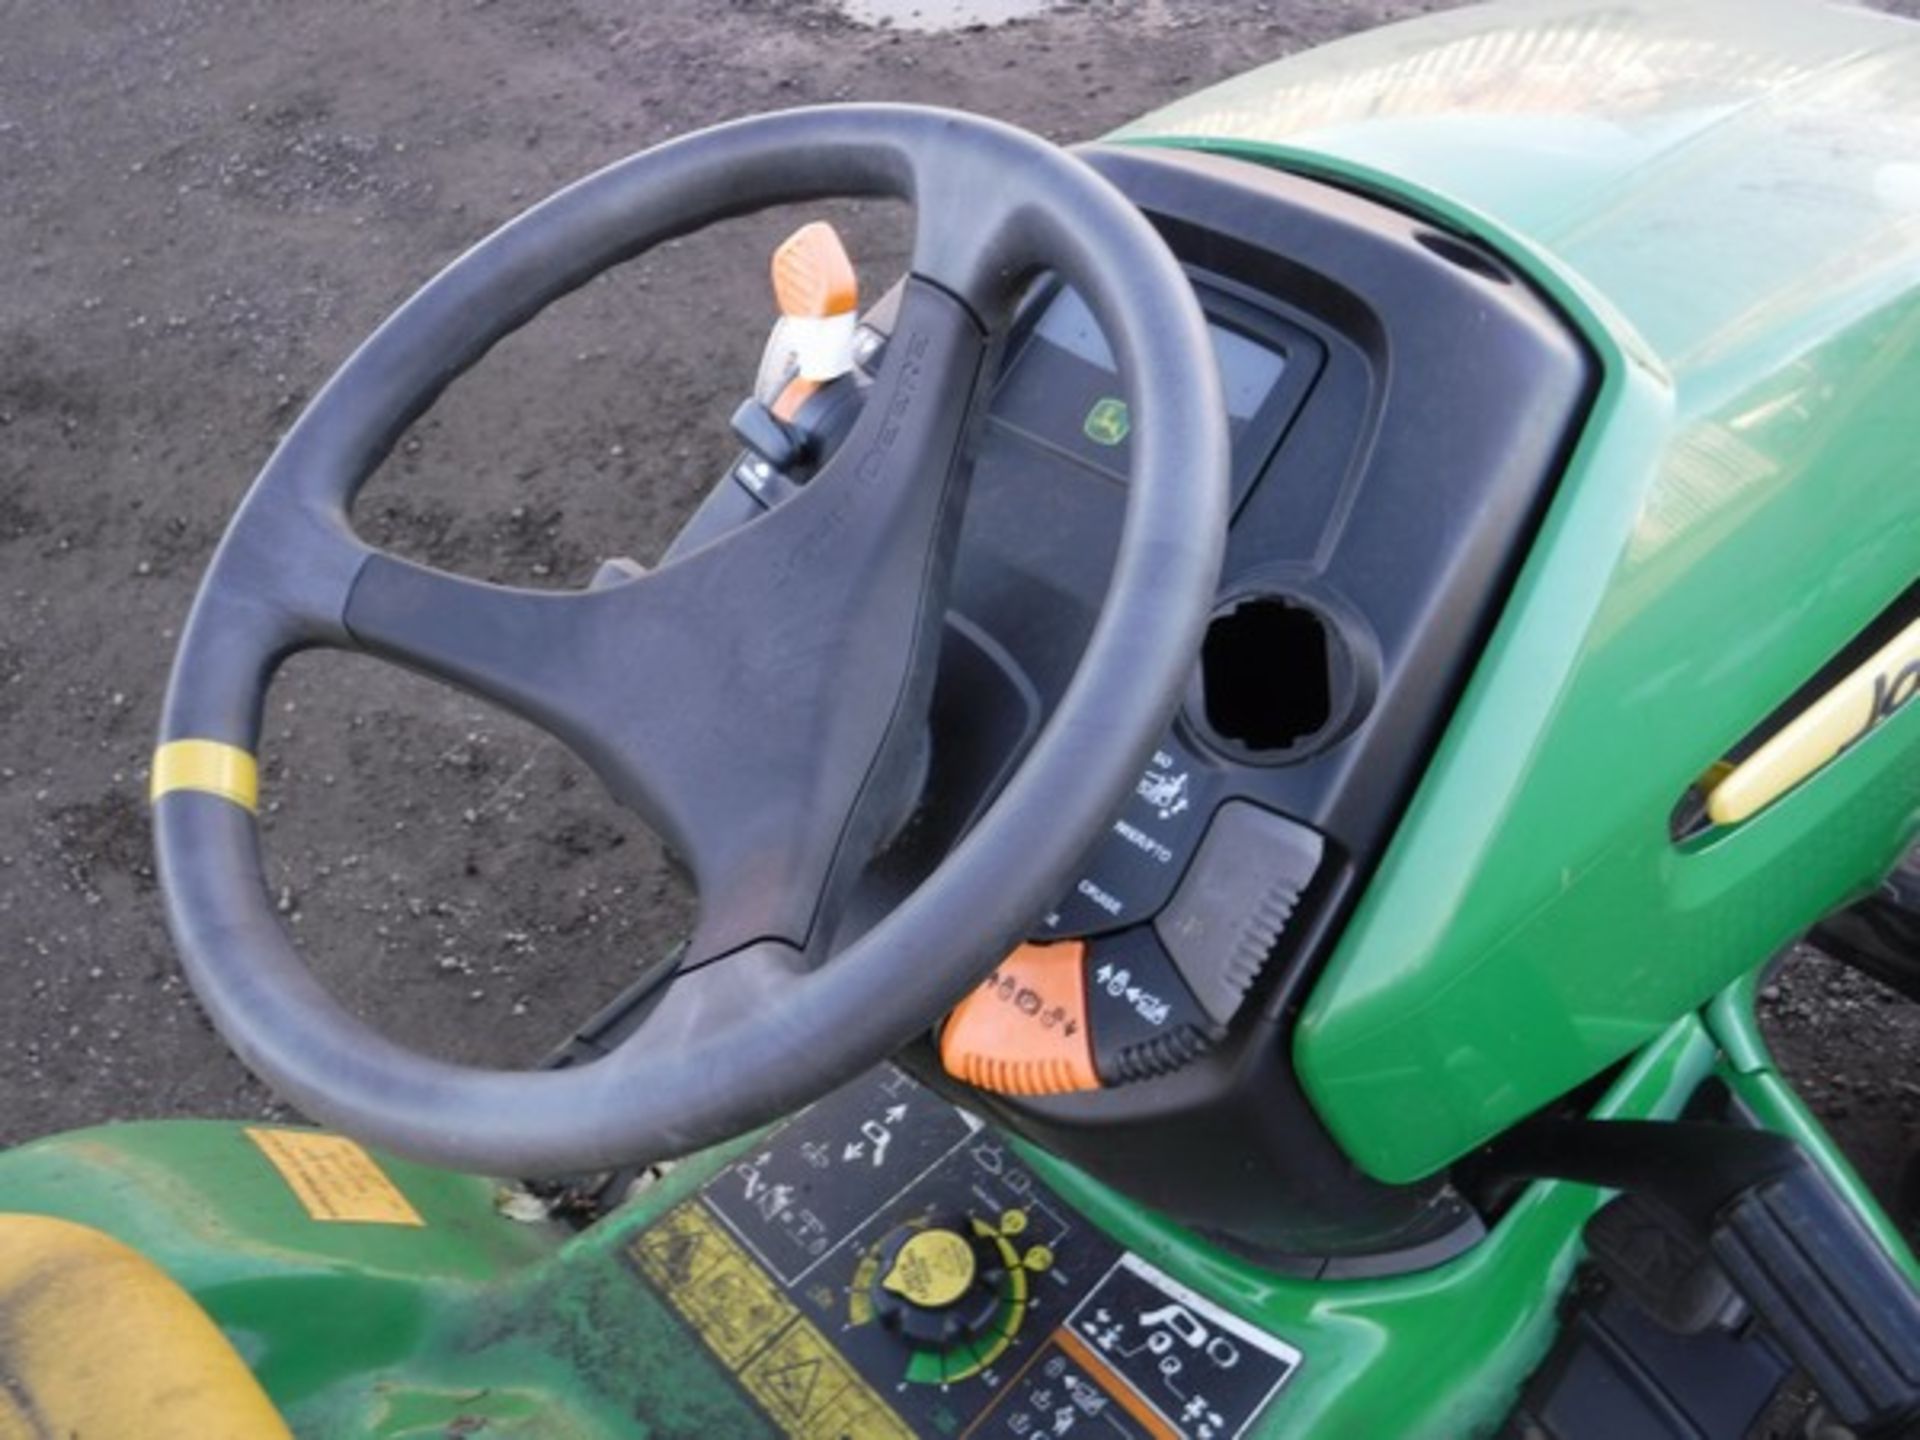 2008 JOHN DEERE X300. Tractor only, no engine or cutting deck. S/N MOX30013085788 - Image 9 of 9